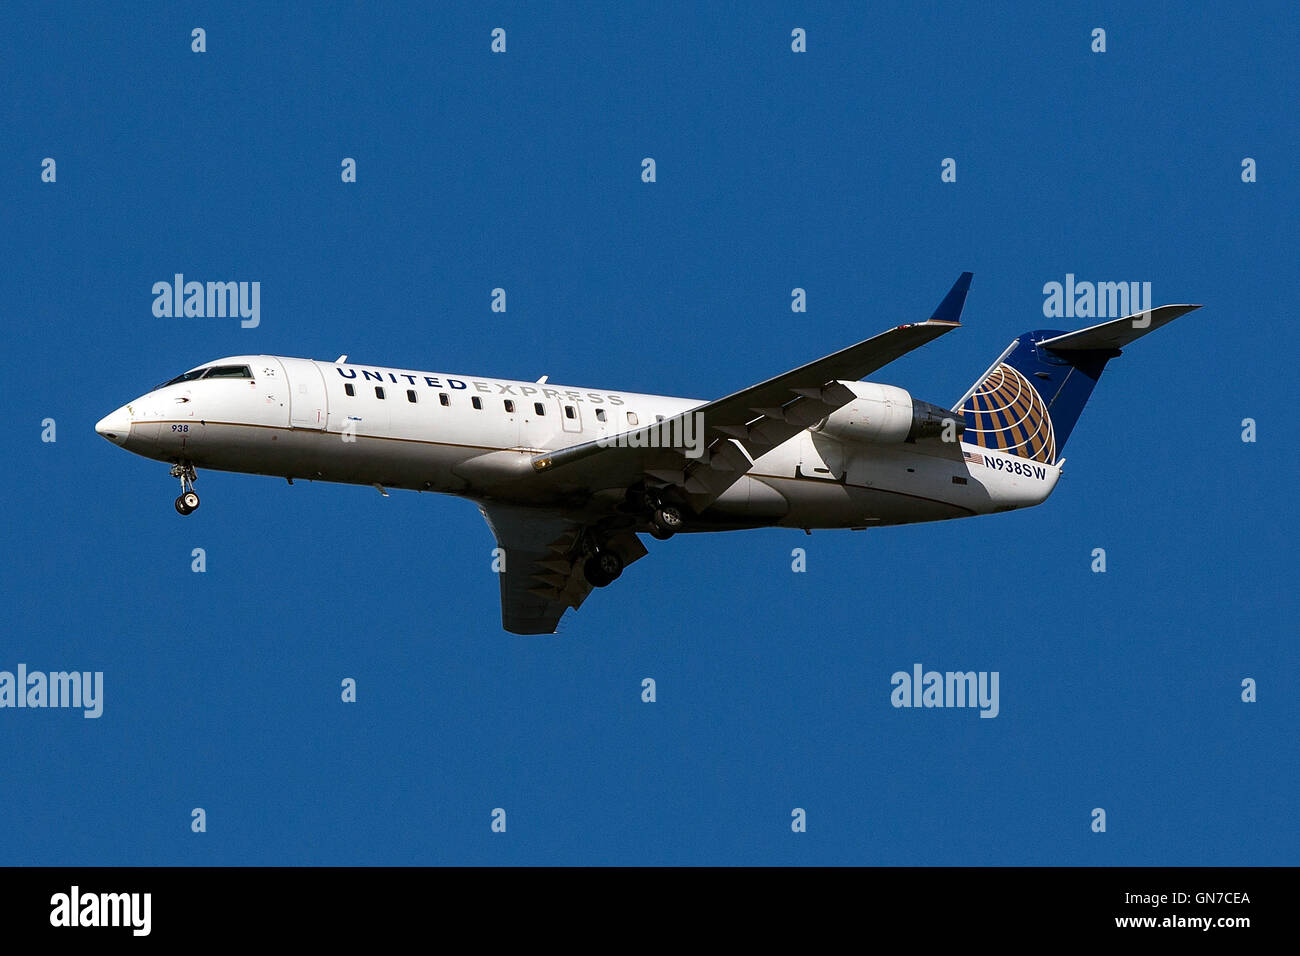 United Express Bombardier CRJ-200ER CL-600-2B19 (registration N938SW) approaches San Francisco International Airport (SFO) over San Mateo, California, United States of America Stock Photo